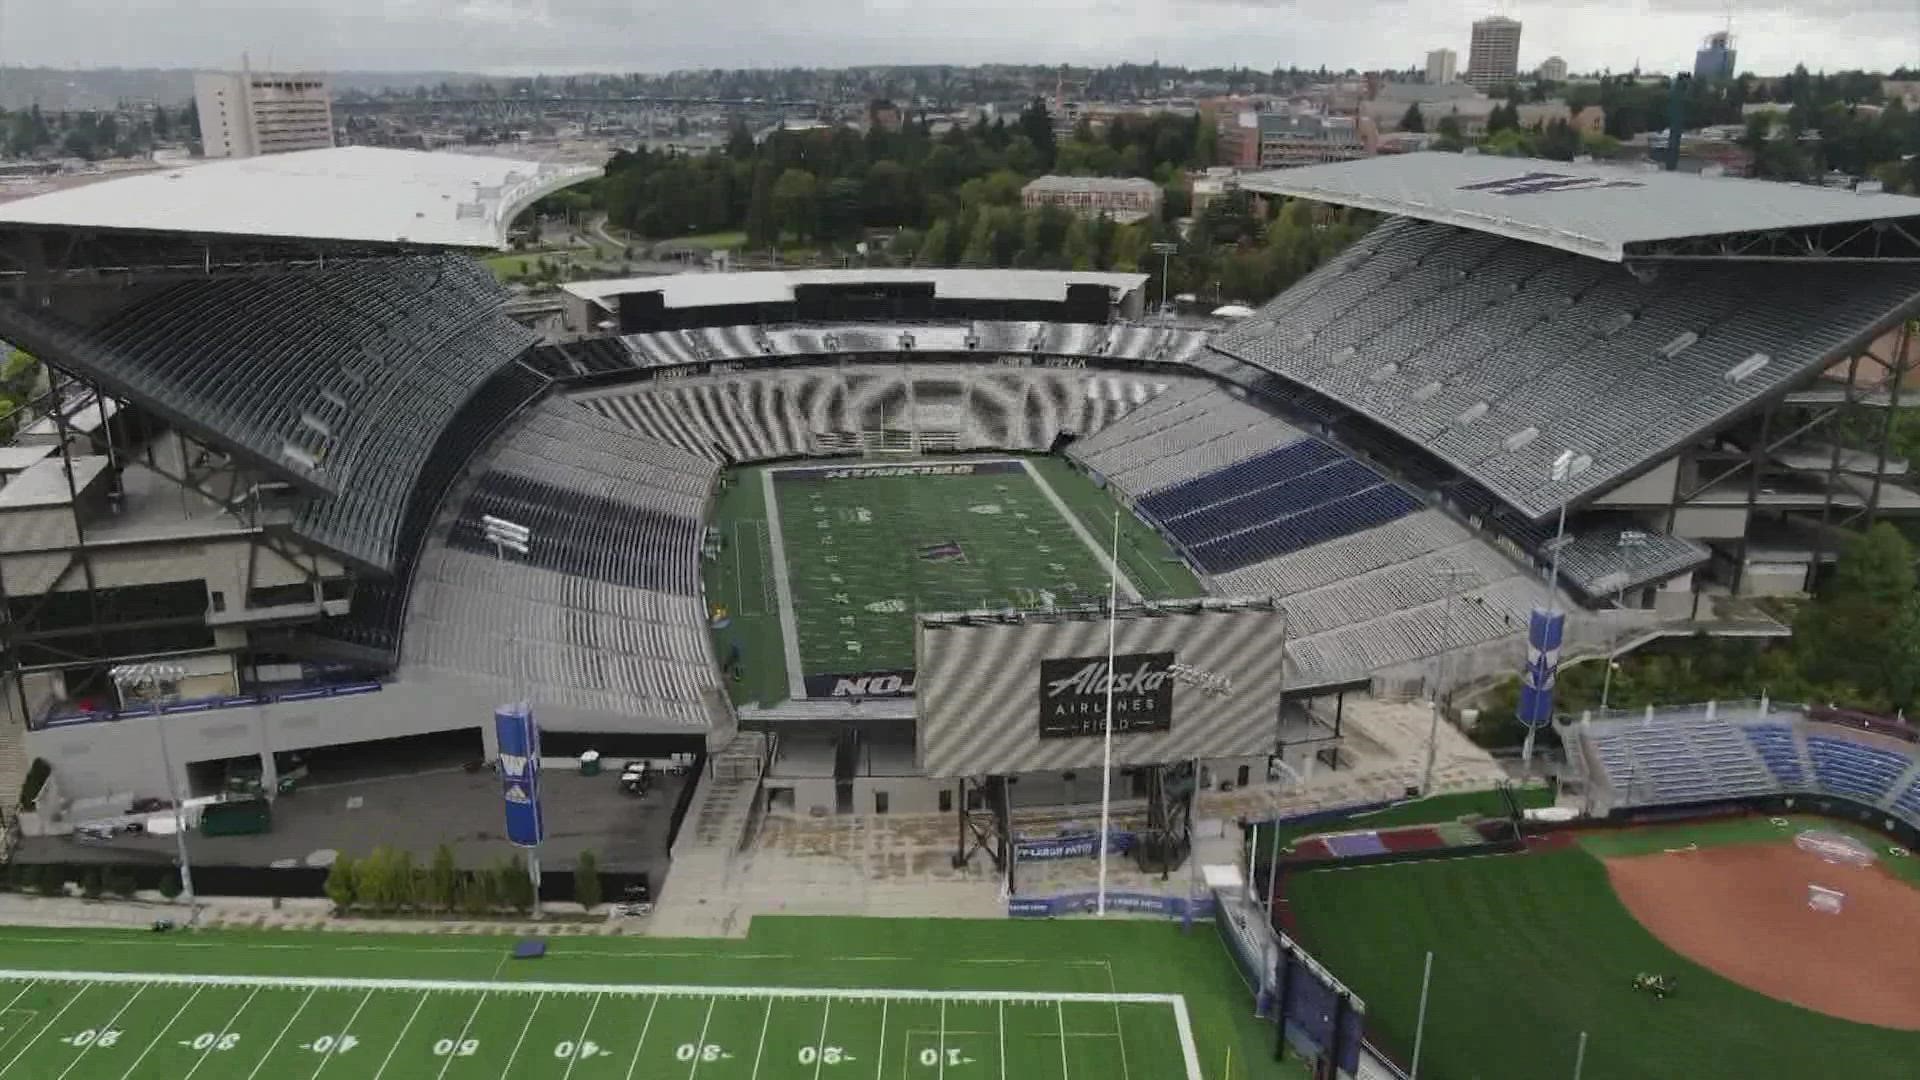 UW's Husky Stadium was closed to fans throughout the COVID-19 pandemic, but reopens Saturday with new safety protocols.